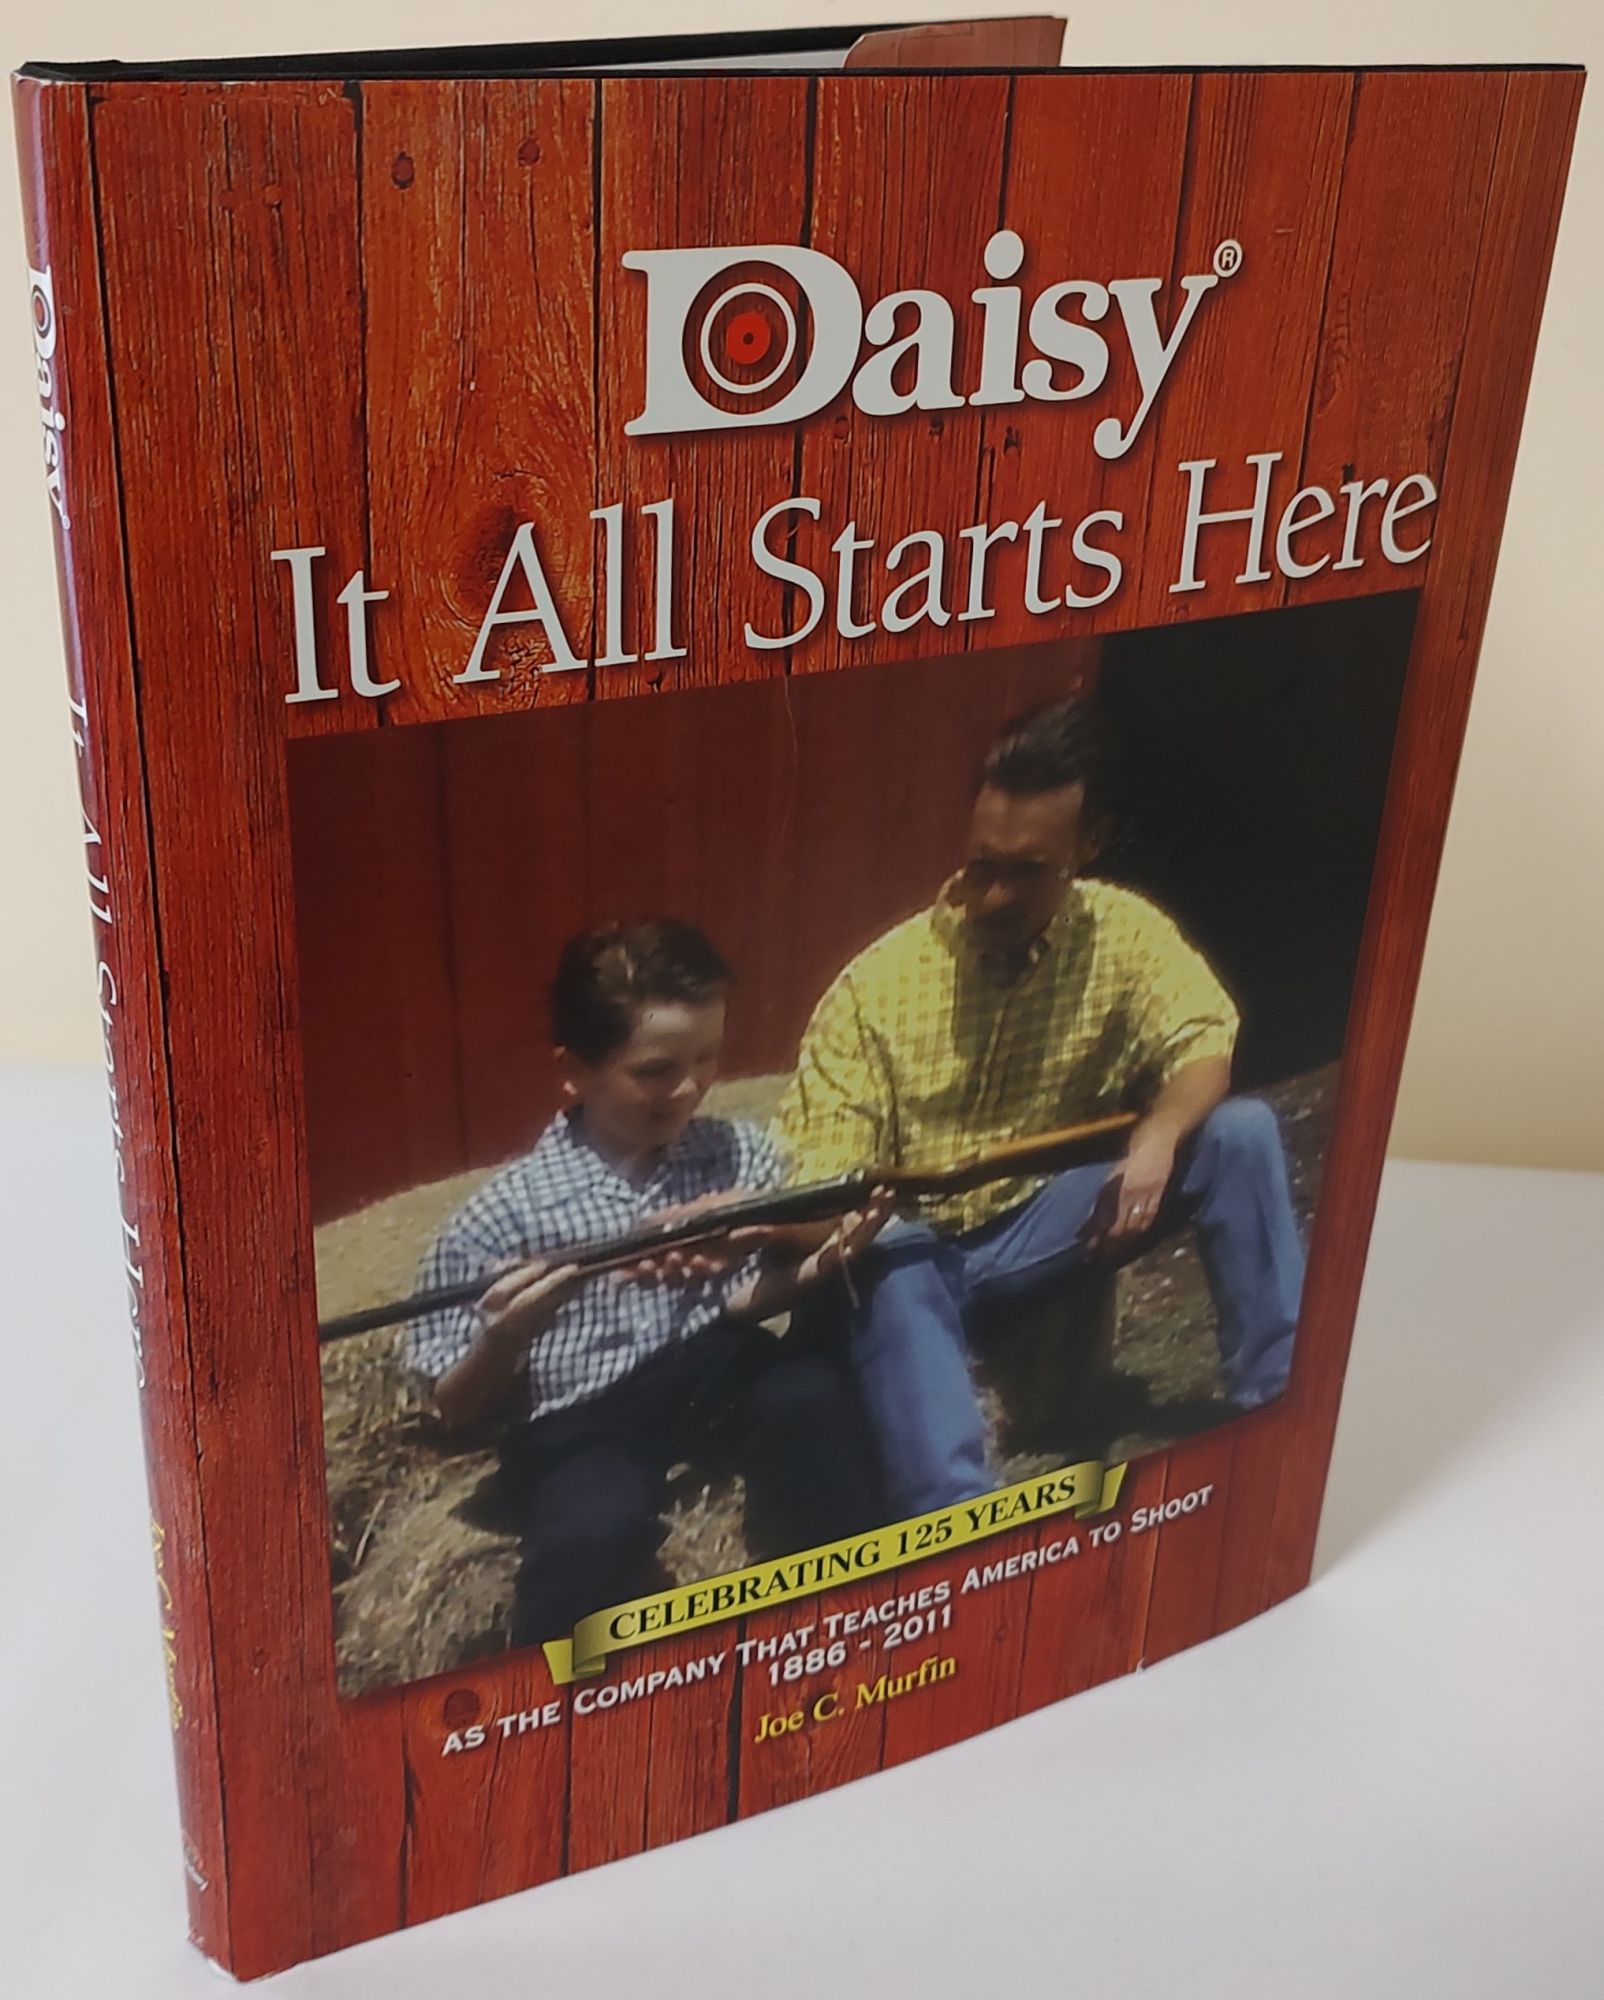 Daisy: It All Starts Here; celebrating 125 years as the company that  teaches America to shoot, 1886-2011 by Joe C. Murfin on Wayside Books